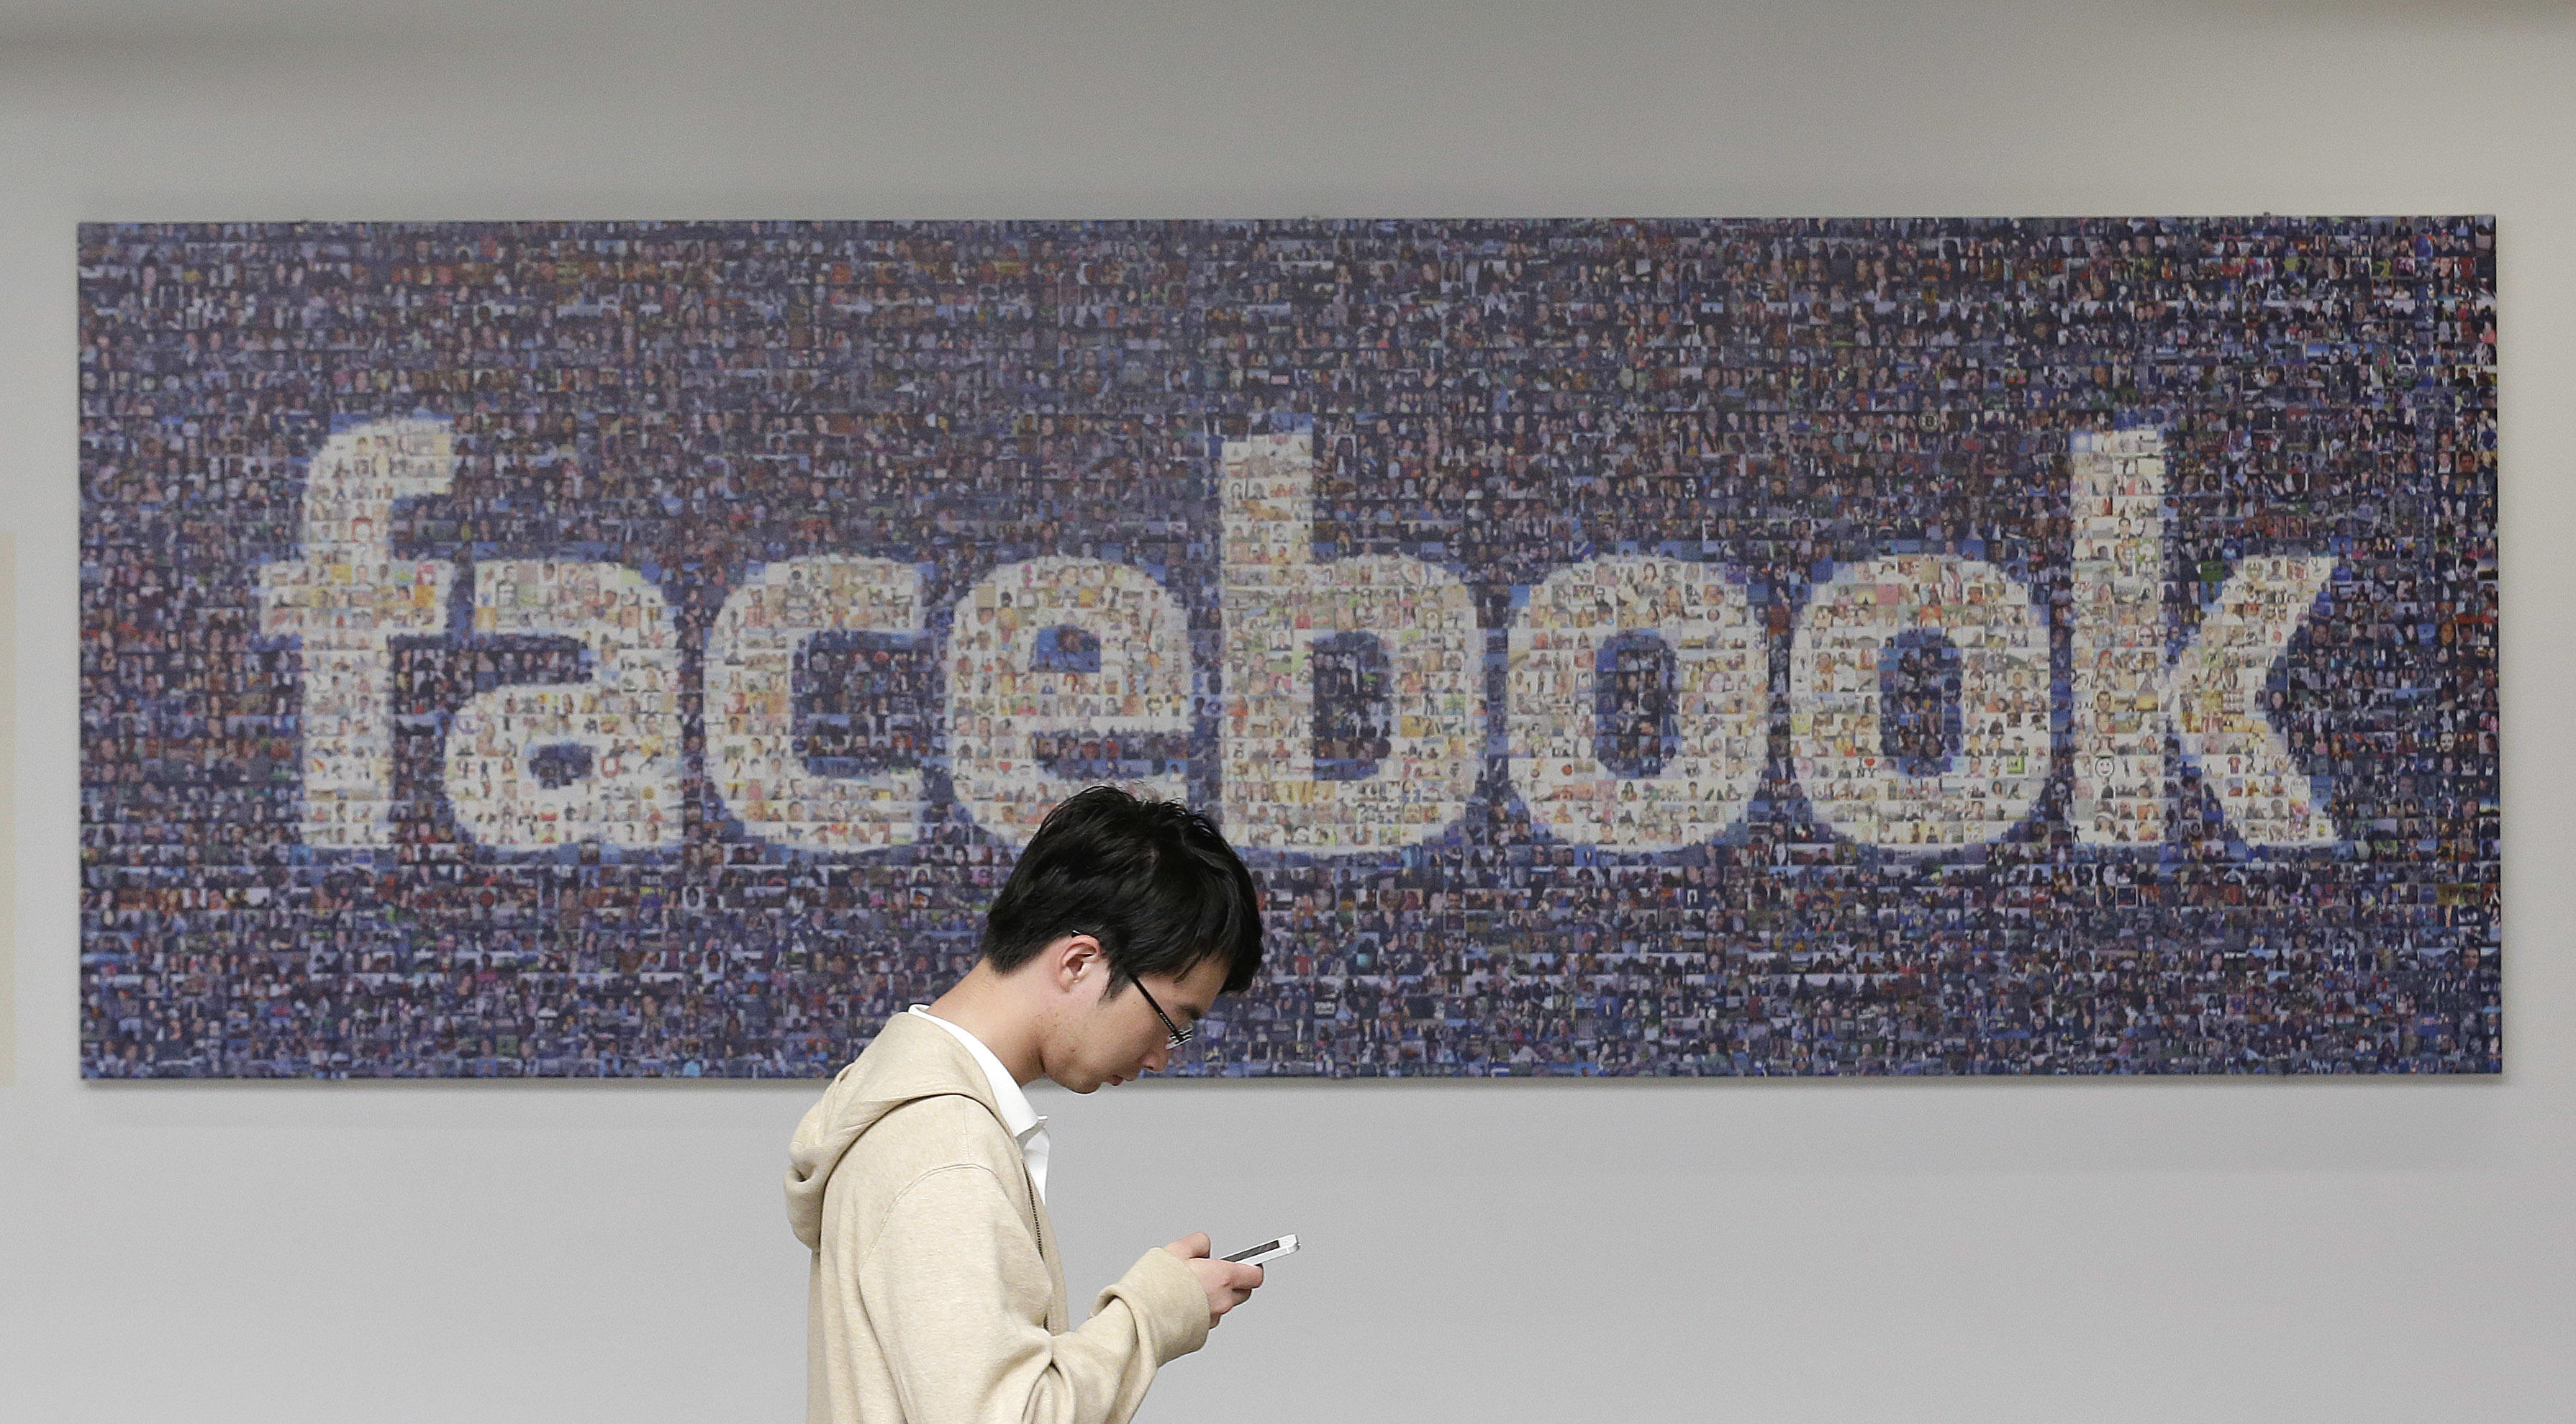 Facebook announced Thursday, April 6, 2017, it is launching a tool to help users spot false news articles on the site. (AP Photo/Jeff Chiu, File)